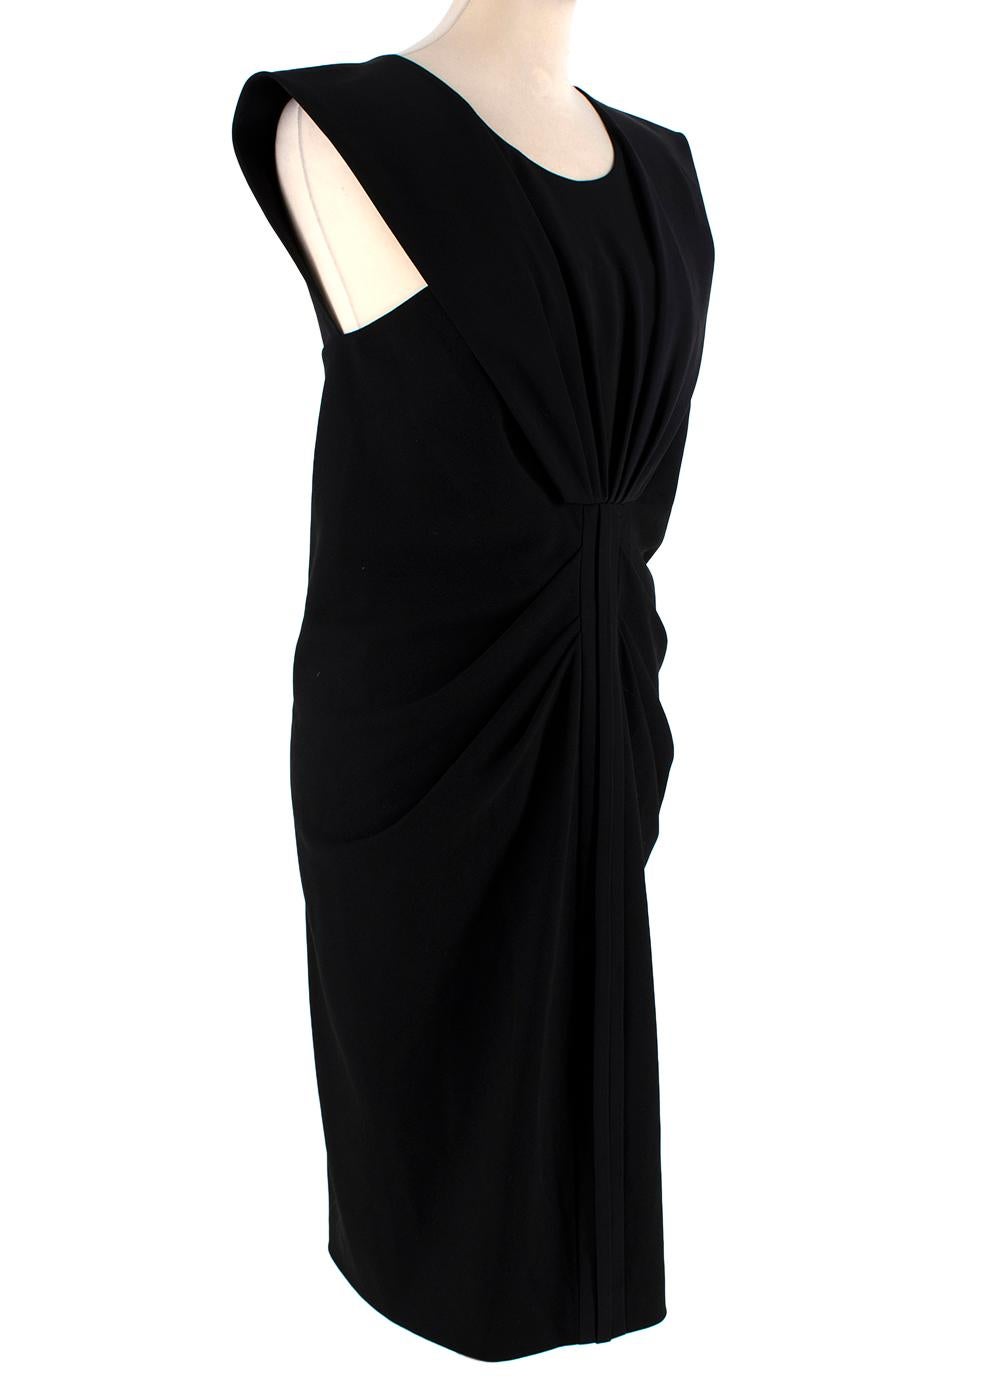 Balenciaga Black Crepe V-Back Dress

- Draped detail cinched from chest to waist 
- Deep V-back
- Flattering a-line silhouette 
- Lined with concealed back zip closure 

This item does not have a care label, but we believe it to be a viscose-cotton